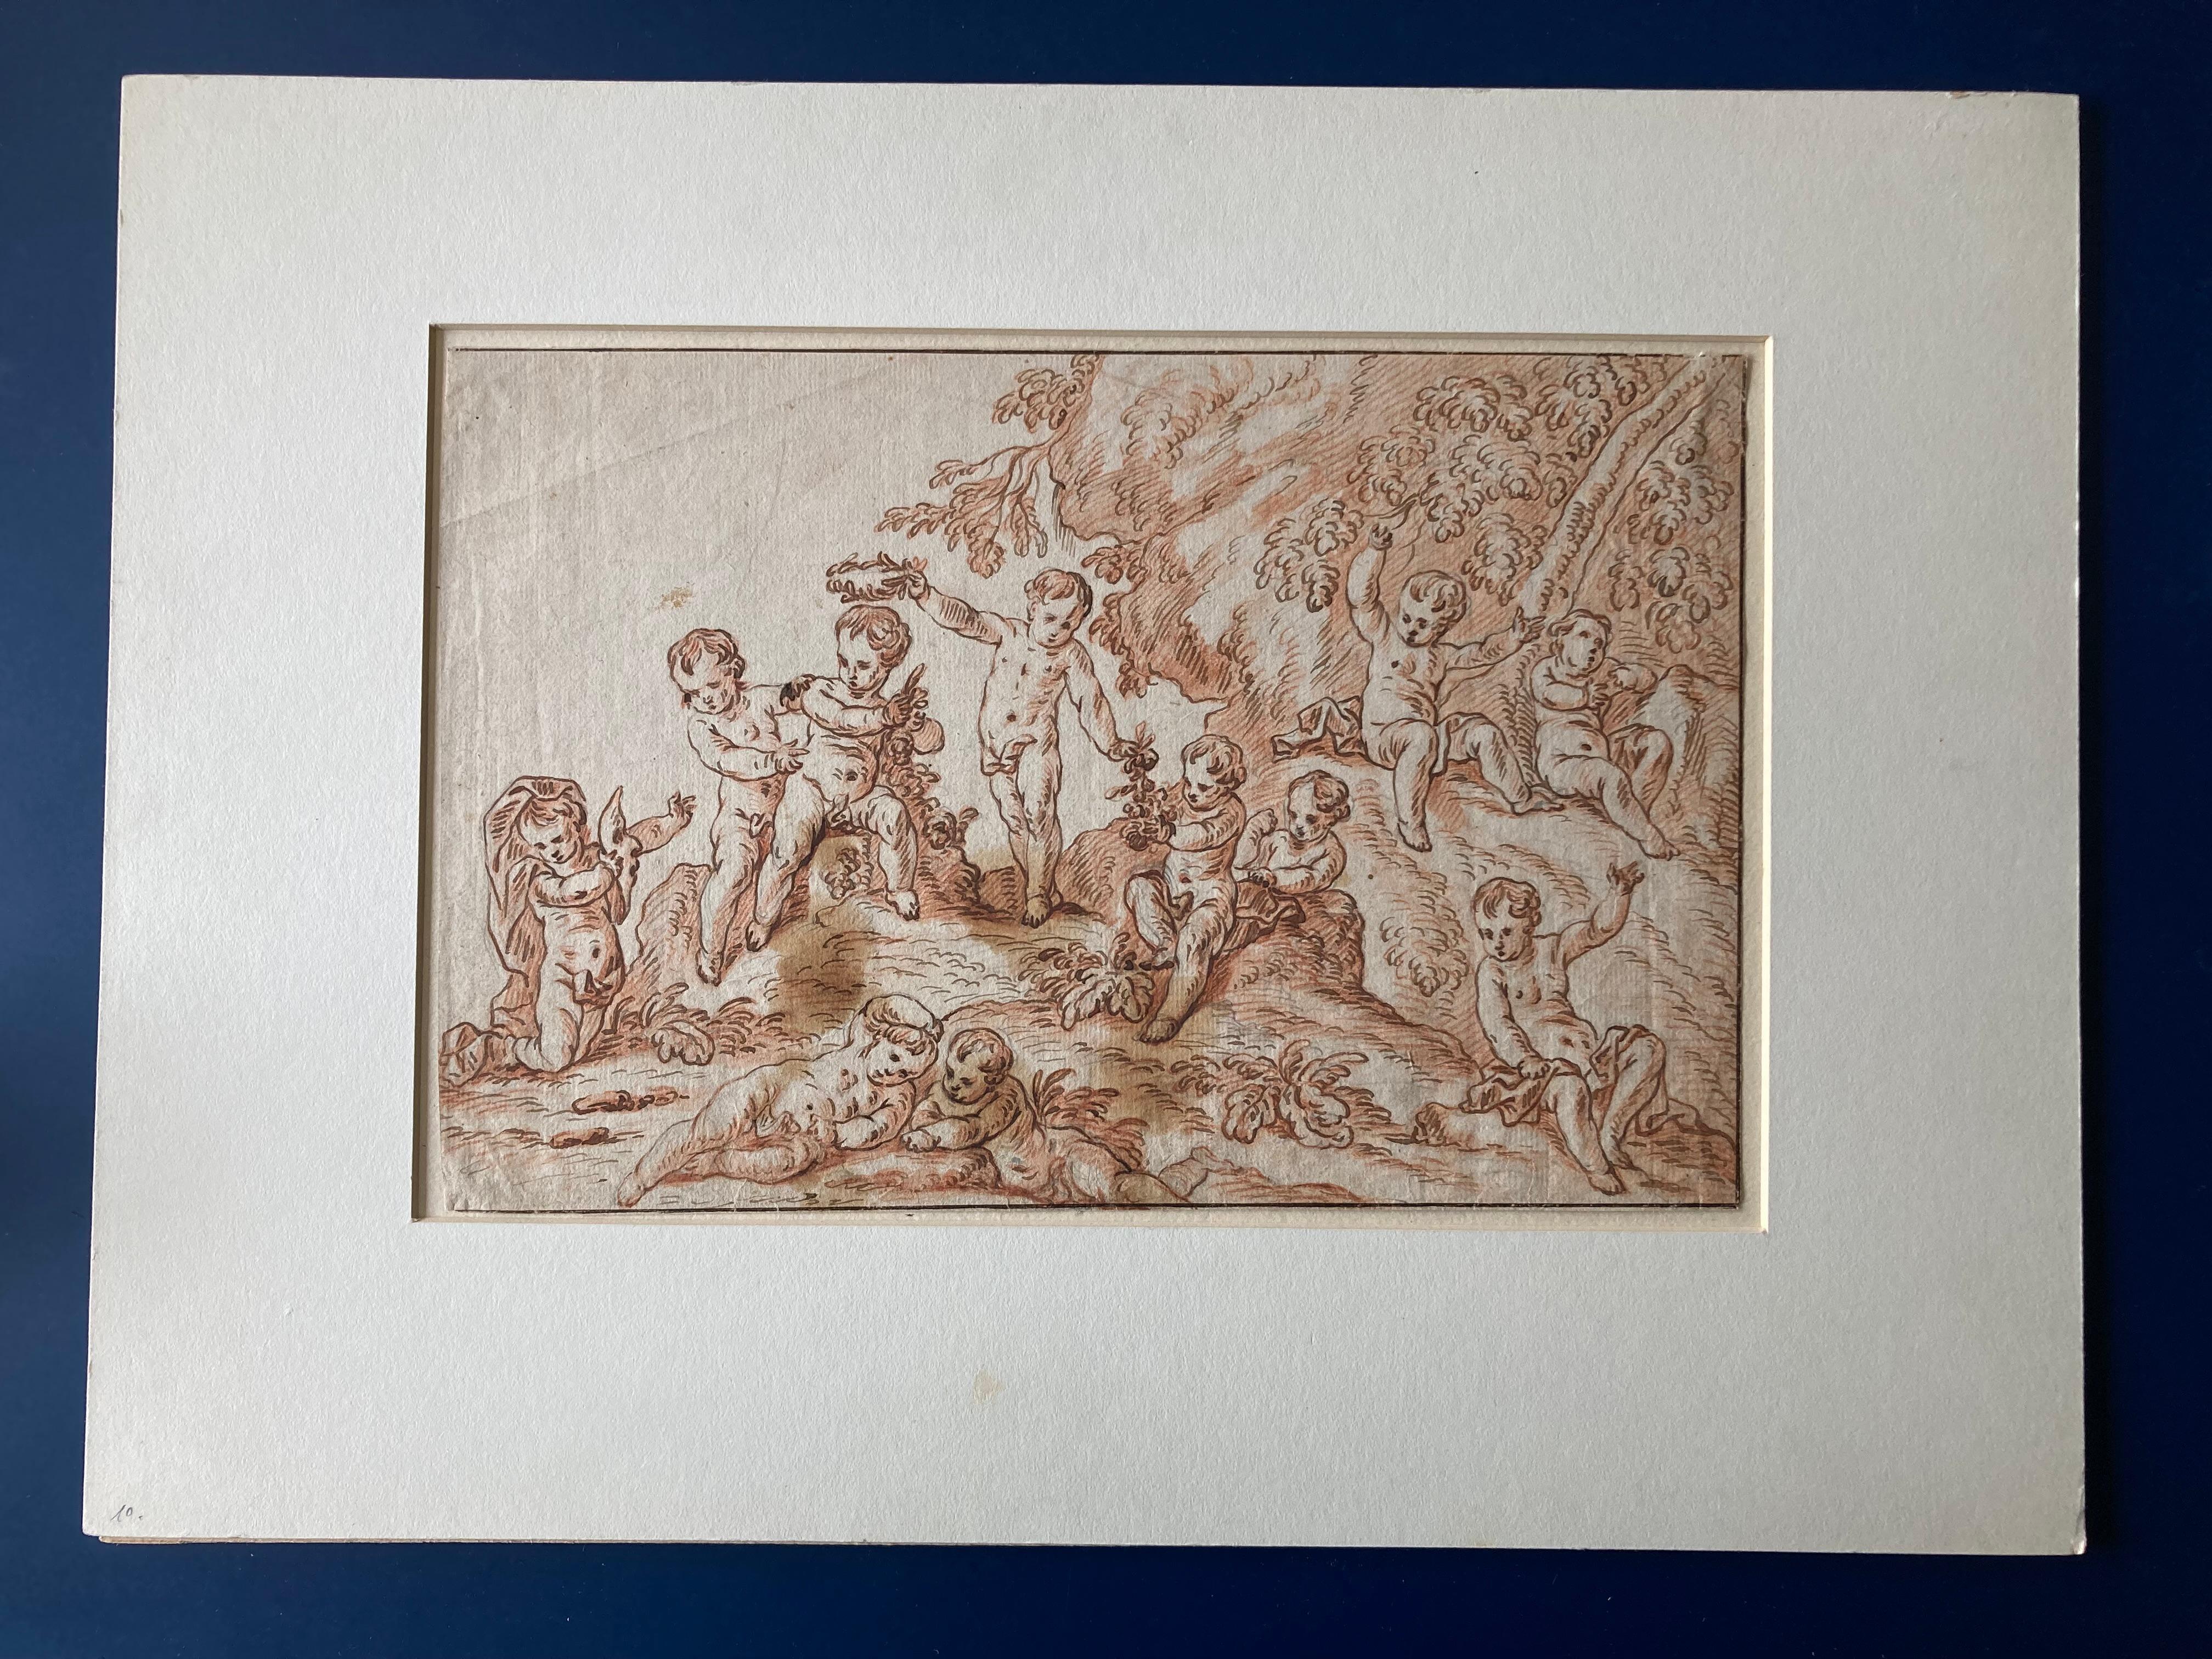 Putti in a Landscape, Putti playing, flowers, Berchet, French Art, Old Master For Sale 2